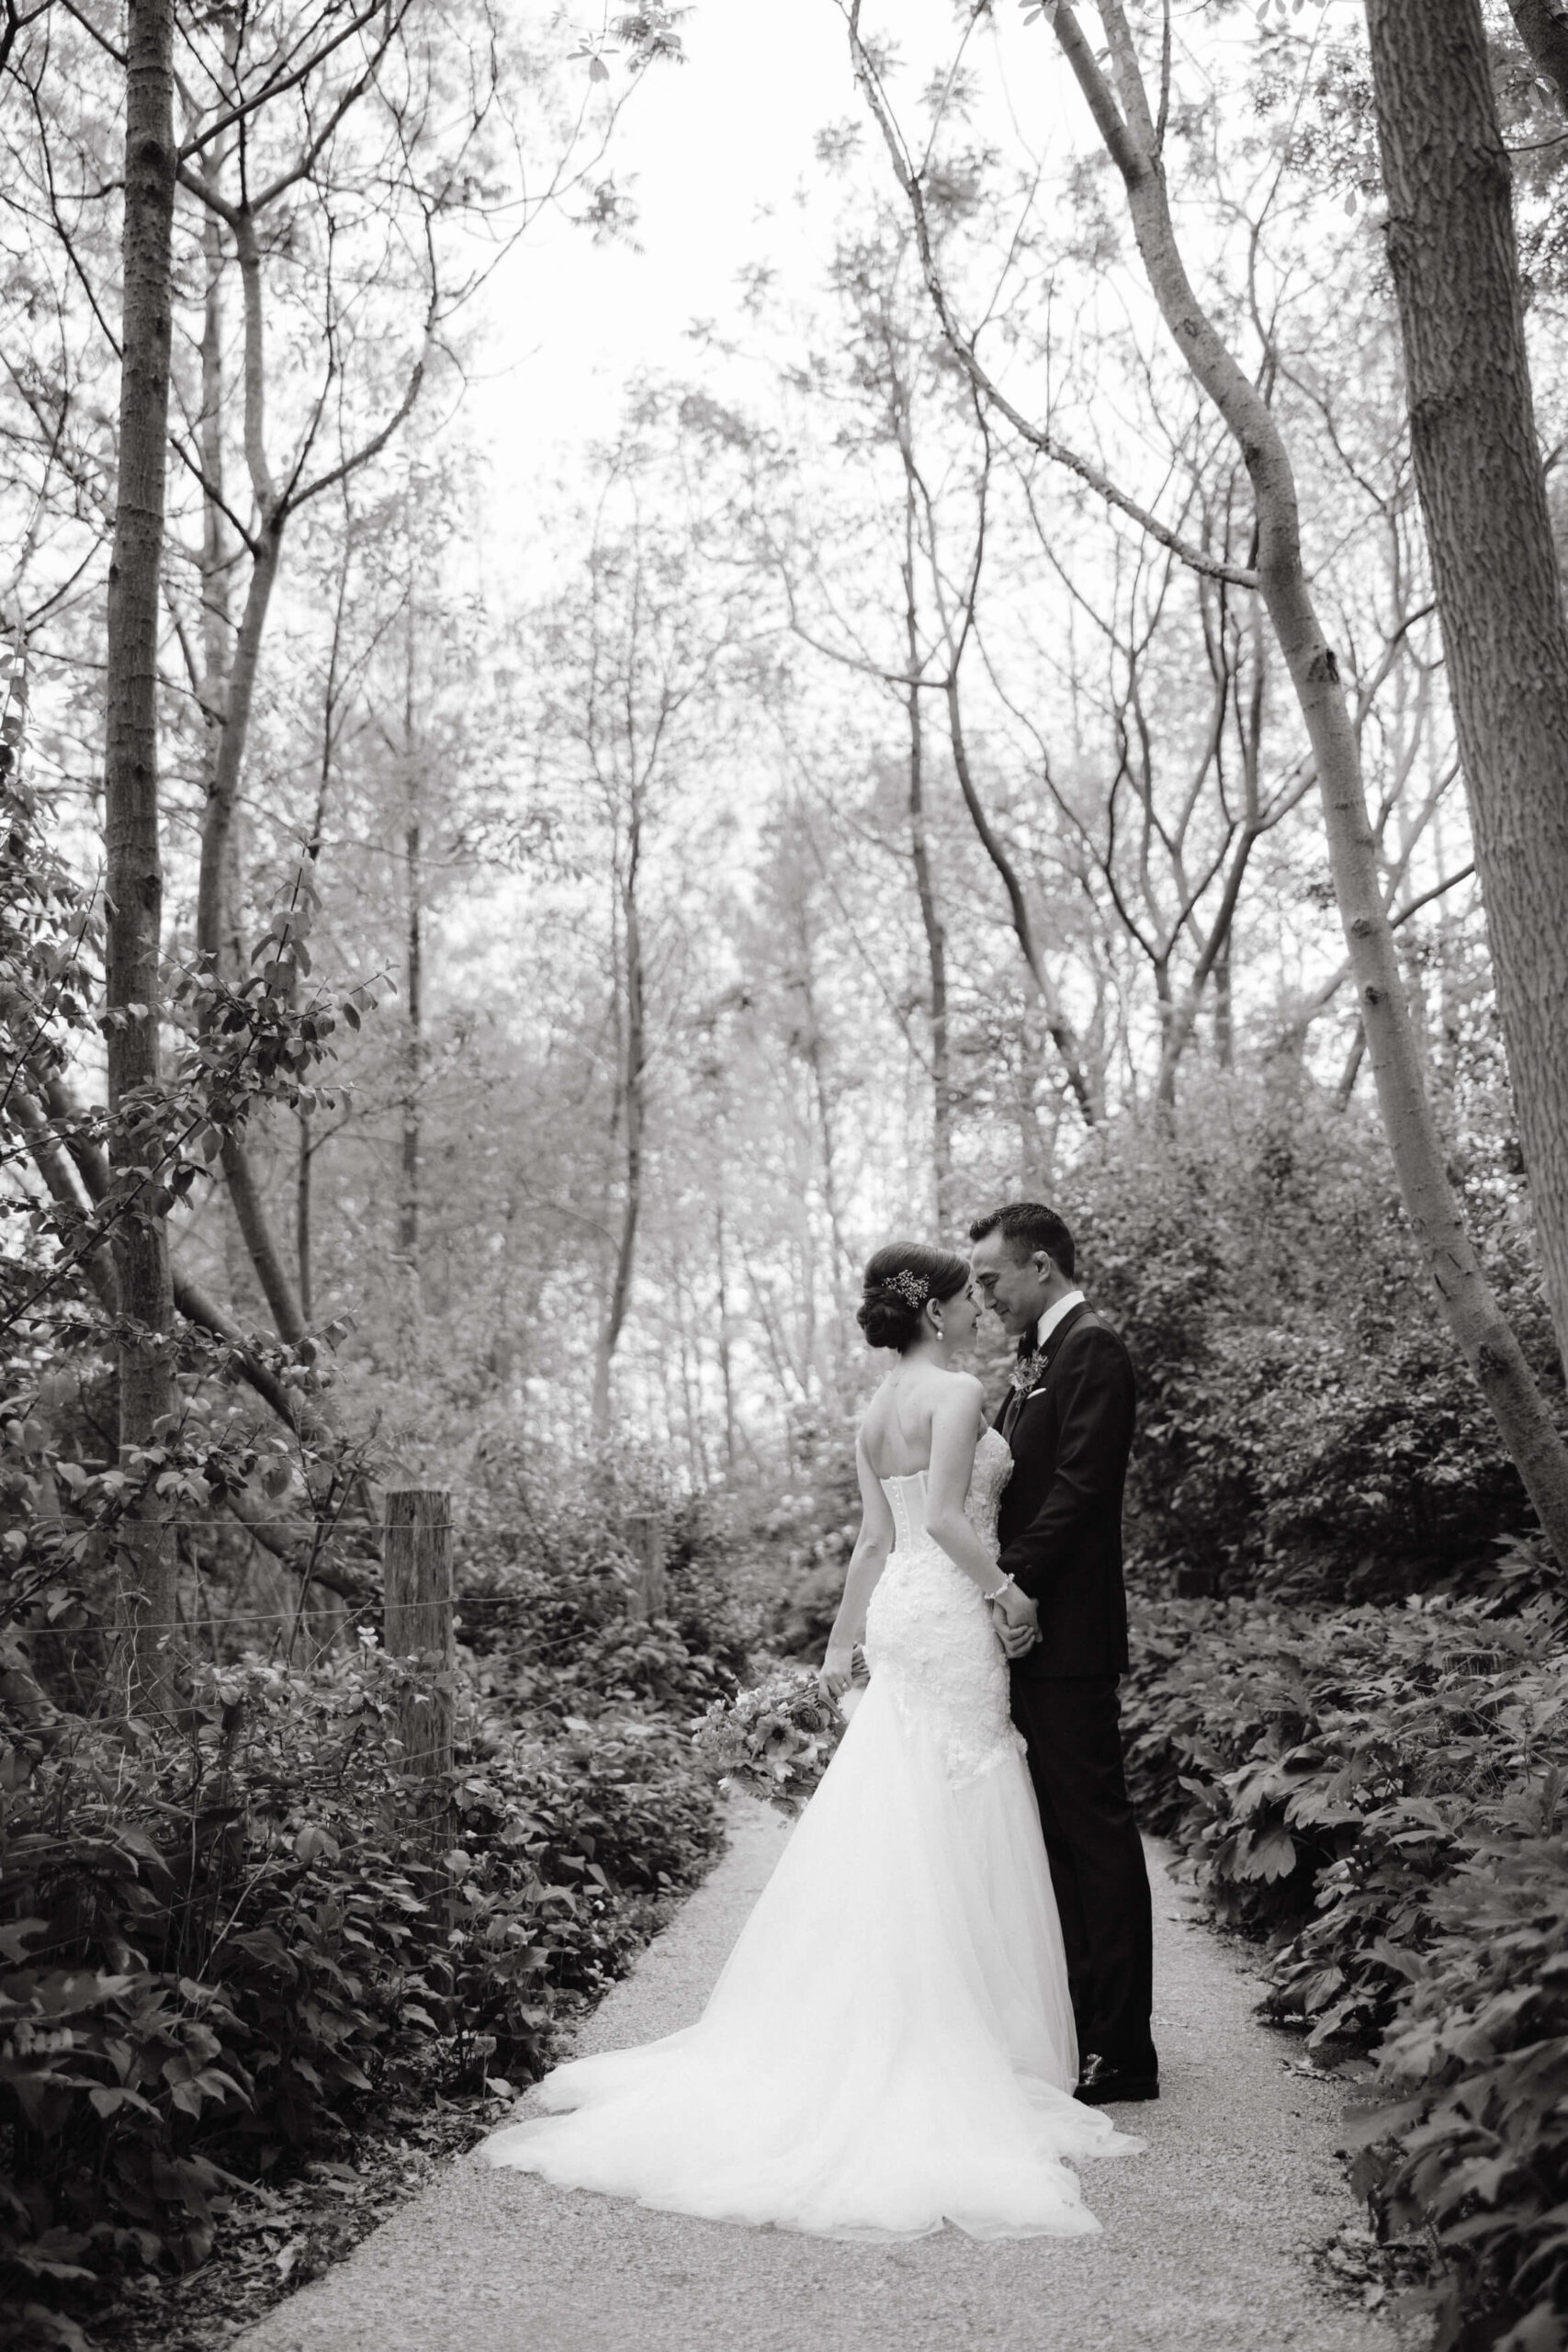 Editorial photo of the couple in the woods. Image by Jenny Fu Studio